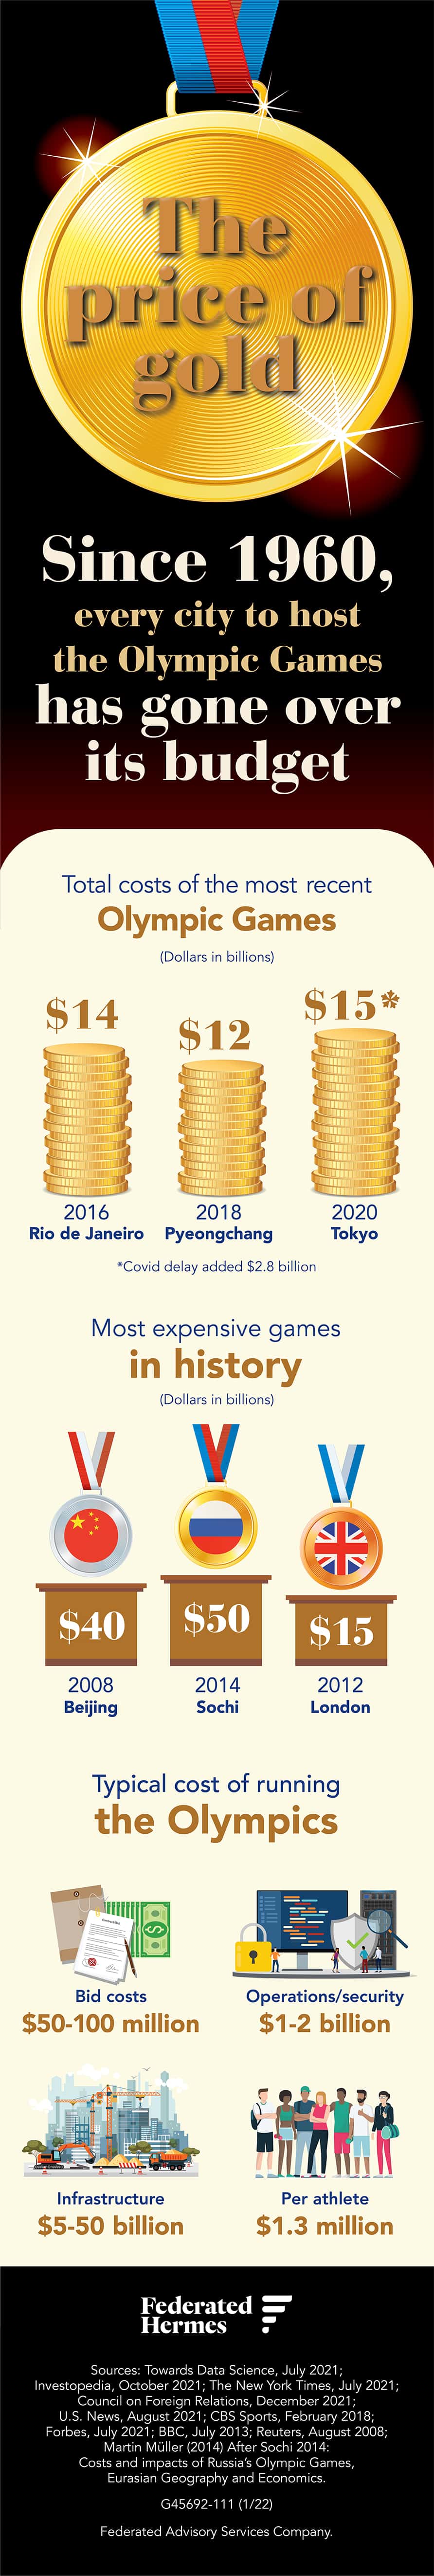 The Price of Gold alt text Title: The Price of Gold Published: January 28, 2022 The Price of Gold Since 1960, every city to host the Olympic Games has gone over its budget. Total costs of the most recent Olympic Games (dollars in billions). Rio de Janeiro spent $14 billion in 2016. Pyeongchang spent $12 billion in 2018. Tokyo spent the most in 2020, spending $15 billion with a covid delay that added $2.8 billion. The most expensive games in history (dollars in billions). In 2008, Beijing spent $40 billion. Sochi spent the most in 2014, spending $50 billion. In 2012, London spent $15 billion. Typical cost of running the Olympics. Bid costs $50-100 million. Operations and security costs $1-2 billion. Infrastructure costs $5-50 billion. It costs $1.3 million per athlete. Information sources: Sources: Towards Data Science, July 2021; Investopedia, October 2021; The New York Times, July 2021; Council on Foreign Relations, December 2021; U.S. News, August 2021; CBS Sports, February 2018; Forbes, July 2021; BBC, July 2013; Reuters, August 2008; Martin Müller (2014) After Sochi 2014: Costs and impacts of Russia’s Olympic Games, Eurasian Geography and Economics.